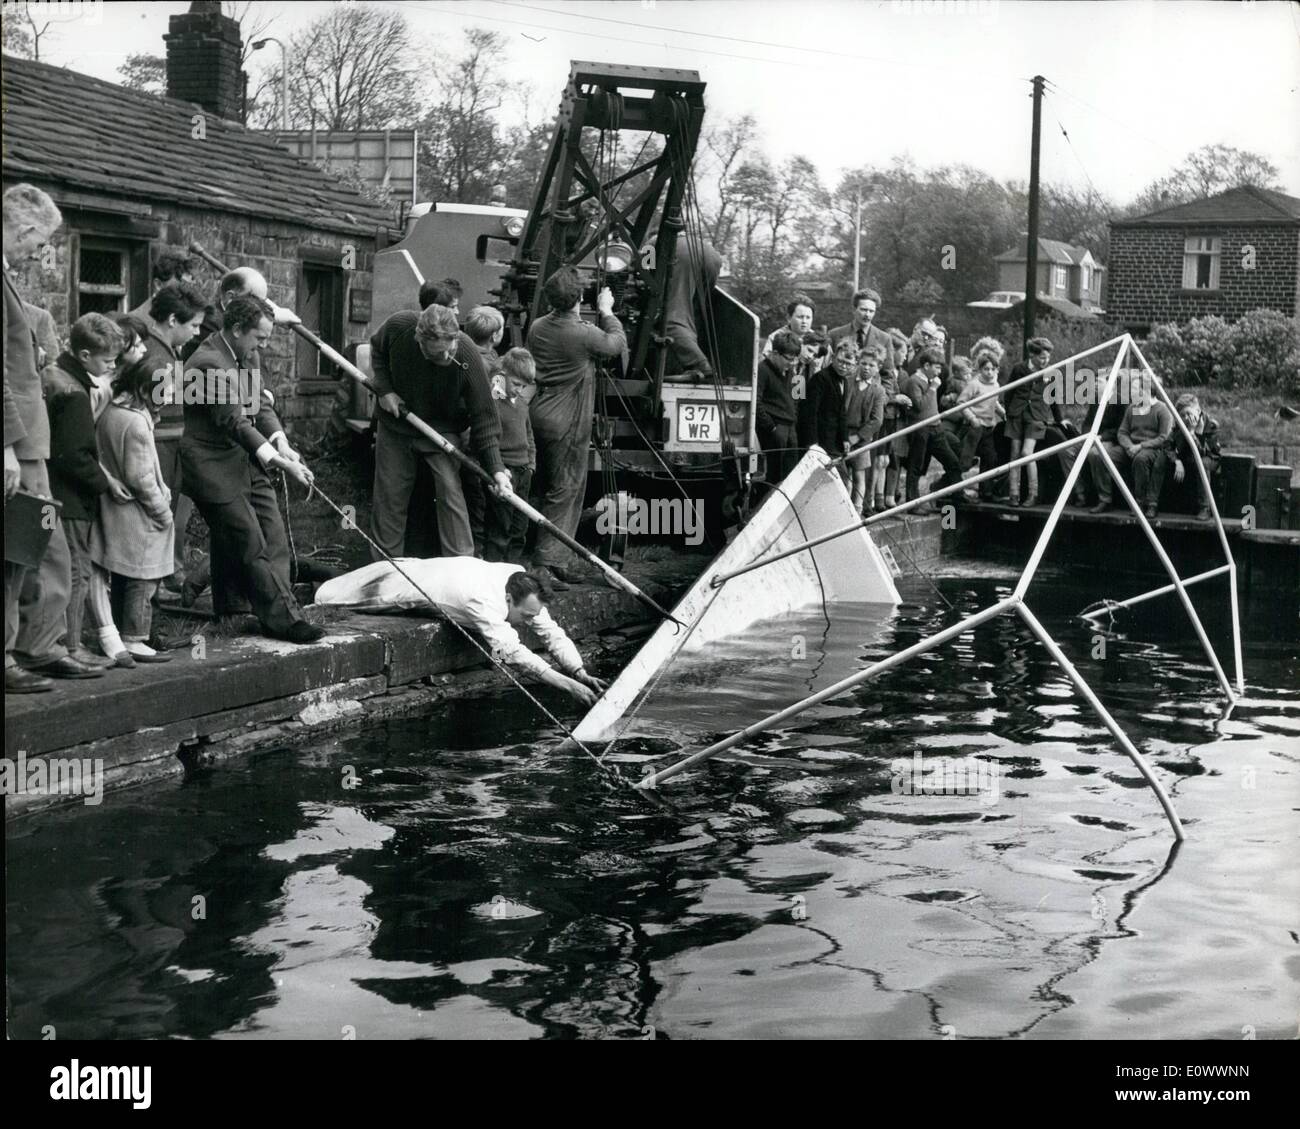 May 05, 1964 - Rescuing The Scuttled Pie Dish: Yesterday an unusual rescue operation was carried our at Miffield, Yorks, when the Denby Dale Pie Dish - the world's largest - was raised from the bottom of the canal where it had been sunk by a gang of youngsters. The dish had been propelled along the canal from it's makers to Denby Dale, where it is to be filled with a mammoth pie to commemorate the births of the four Royal babies Stock Photo